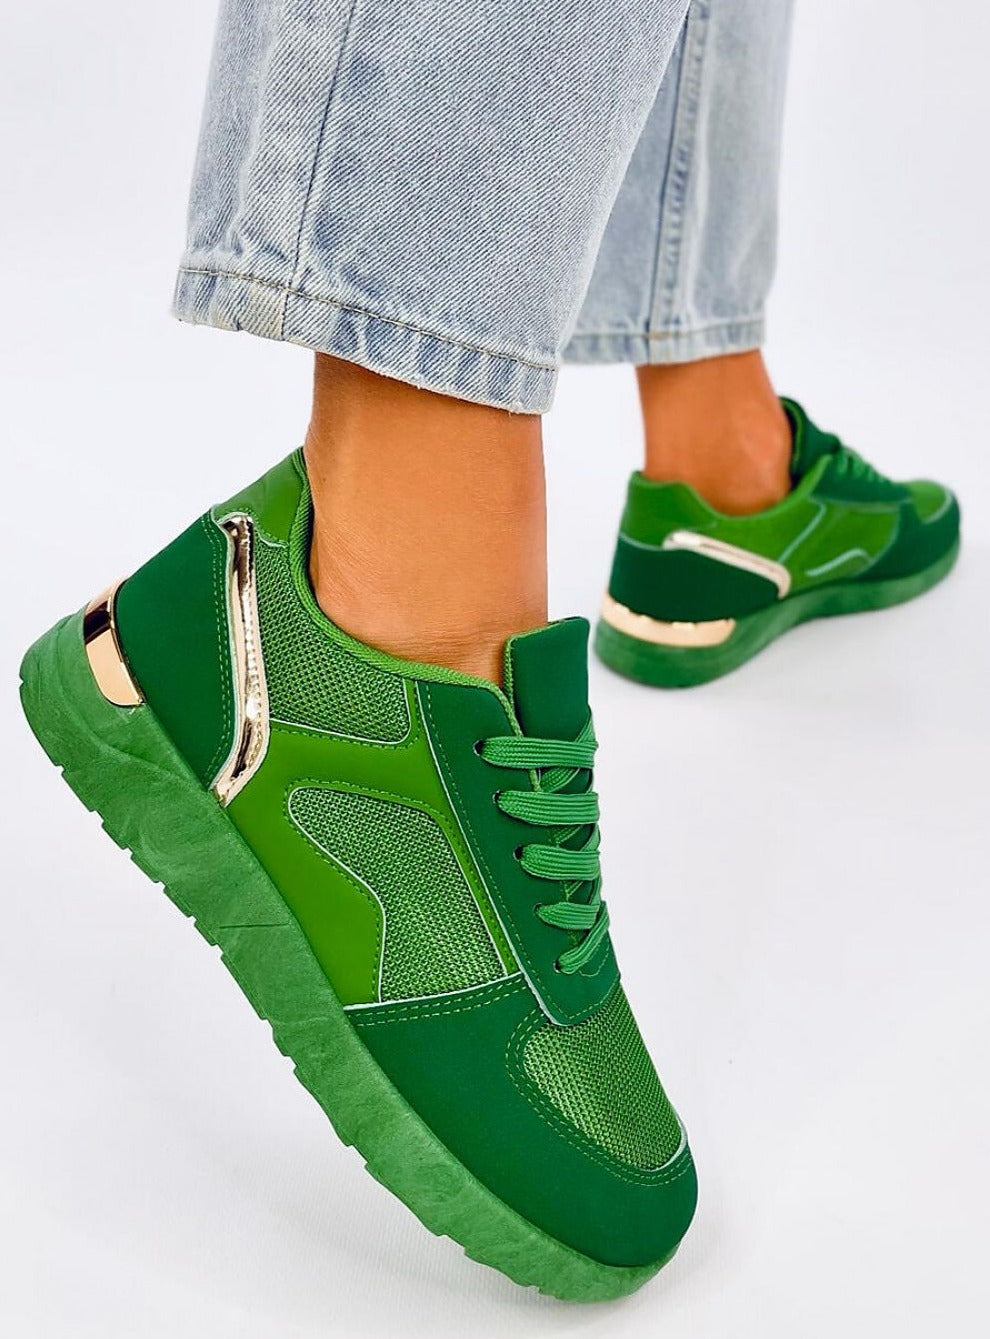 TEEK - Green Laced Texture Sneakers SHOES Inello 6  